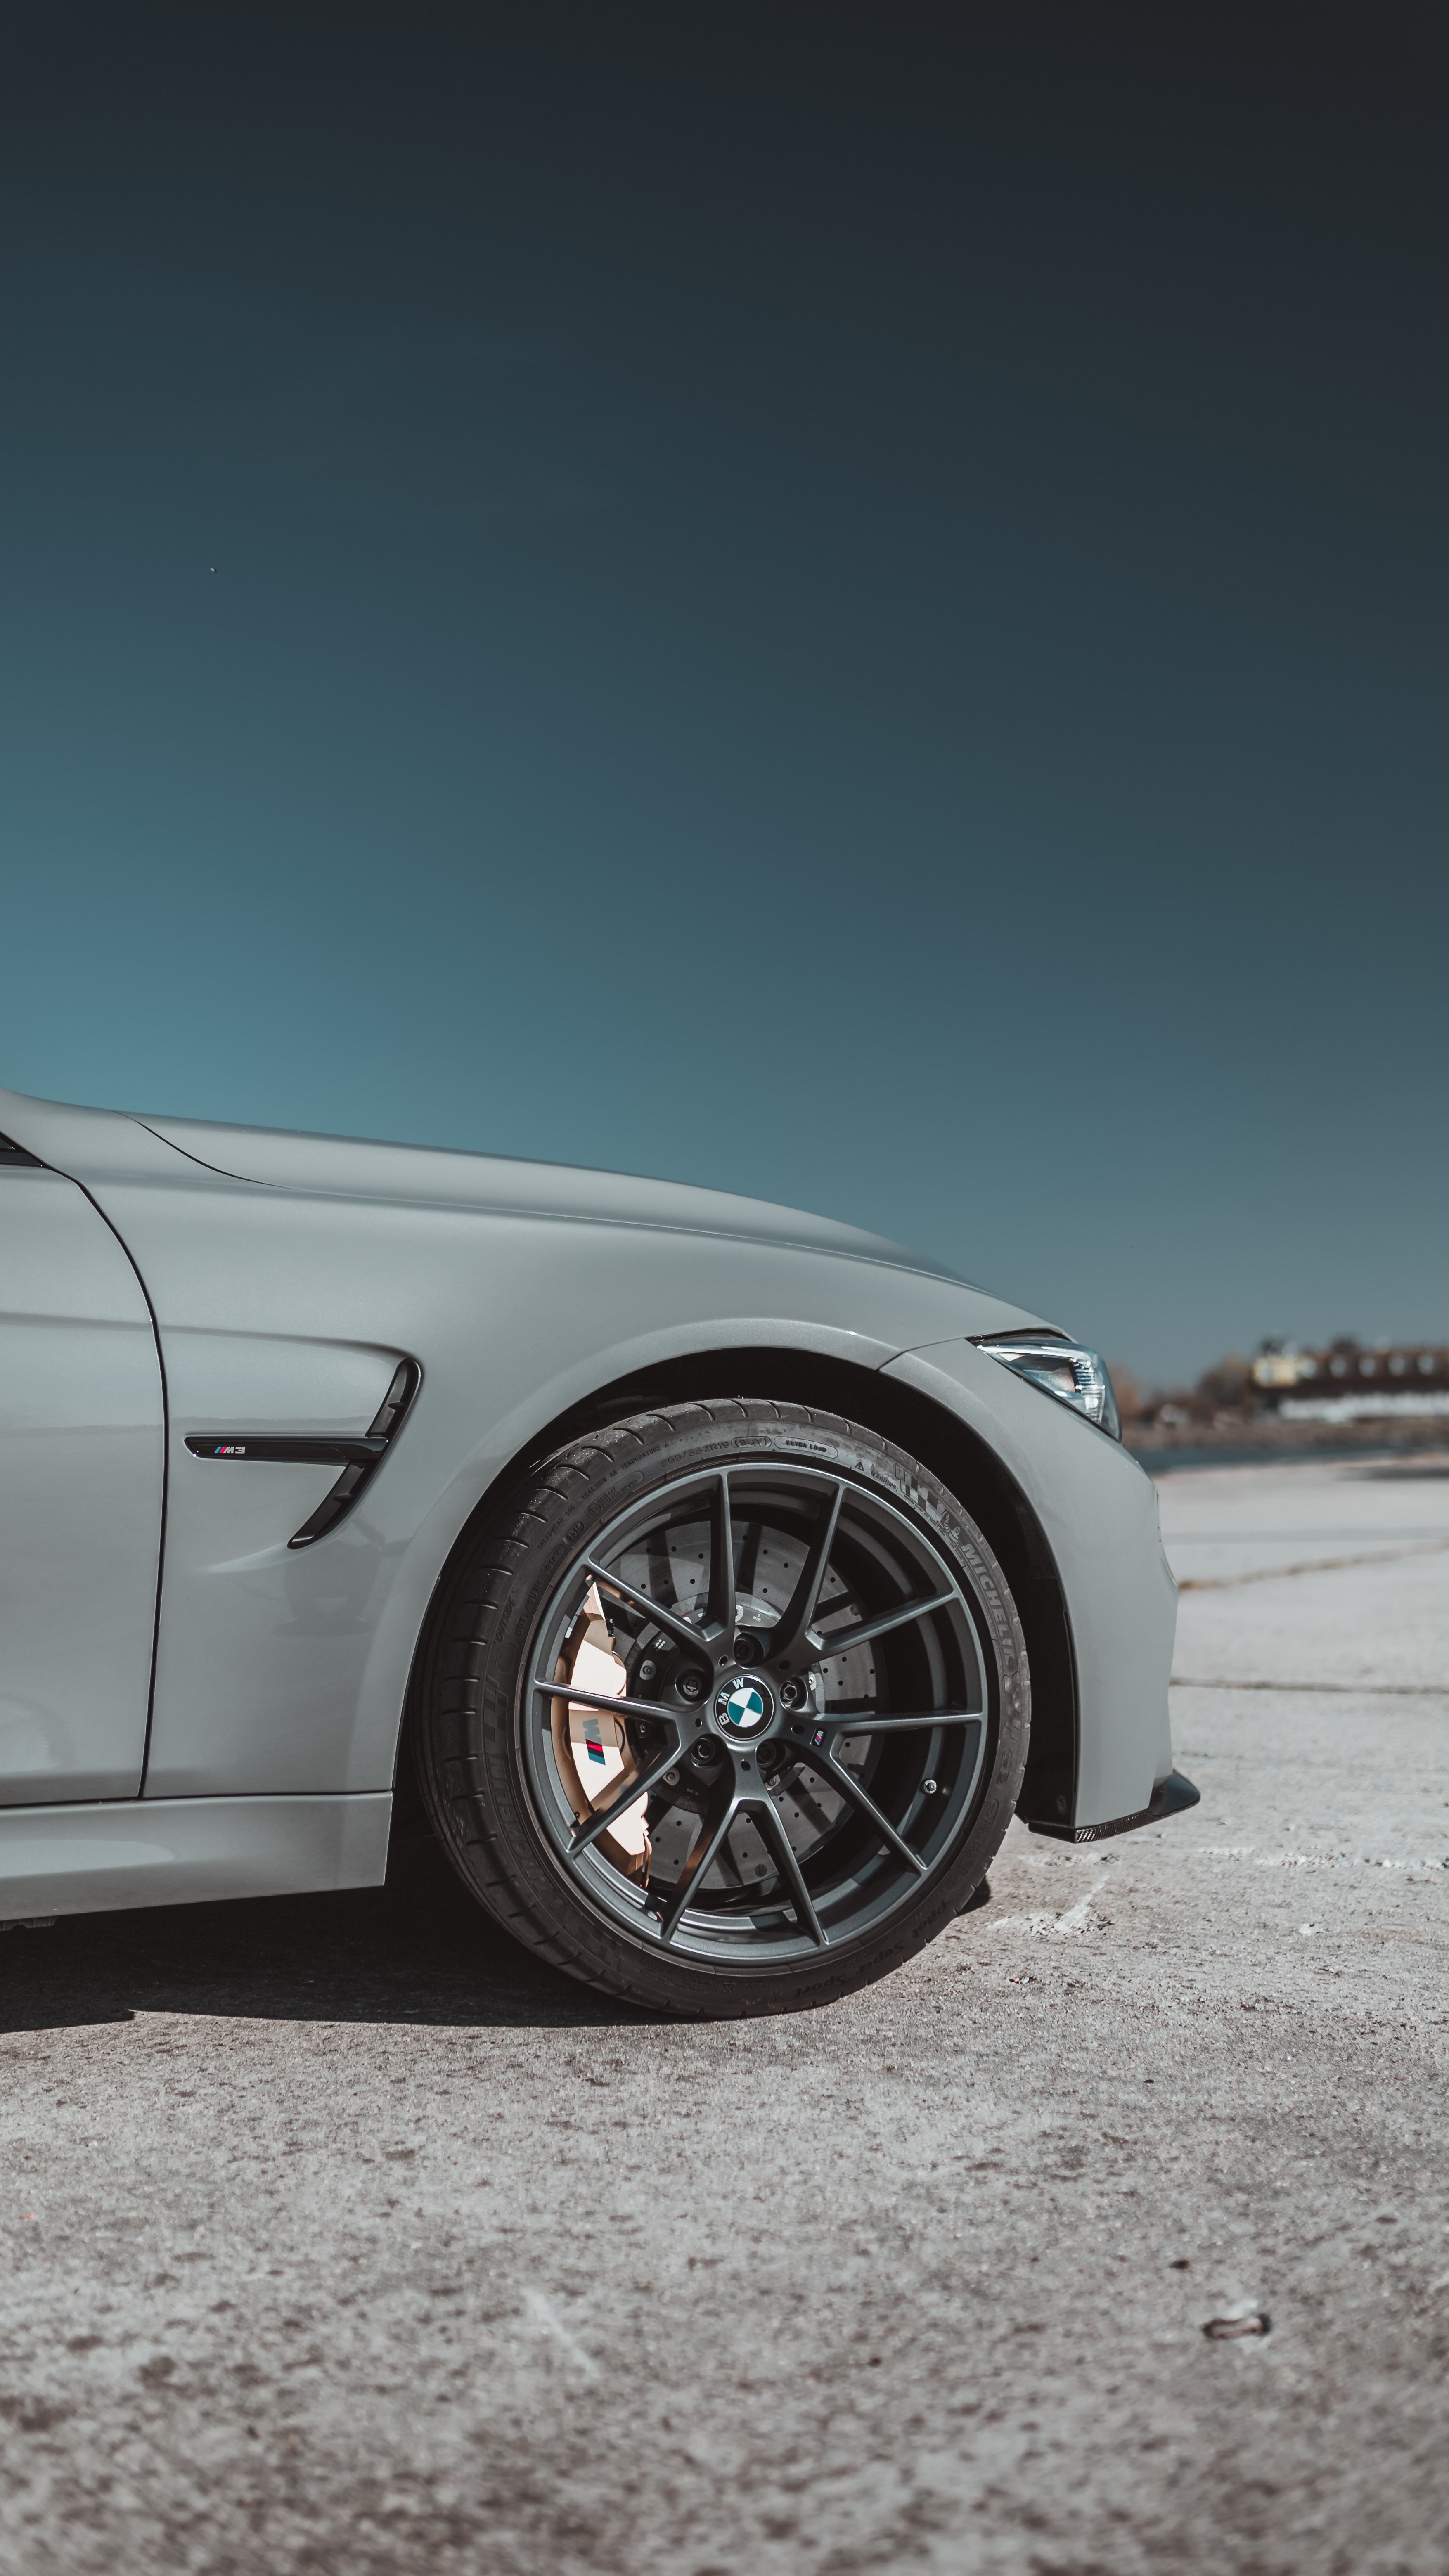 Best Mobile Bmw Backgrounds